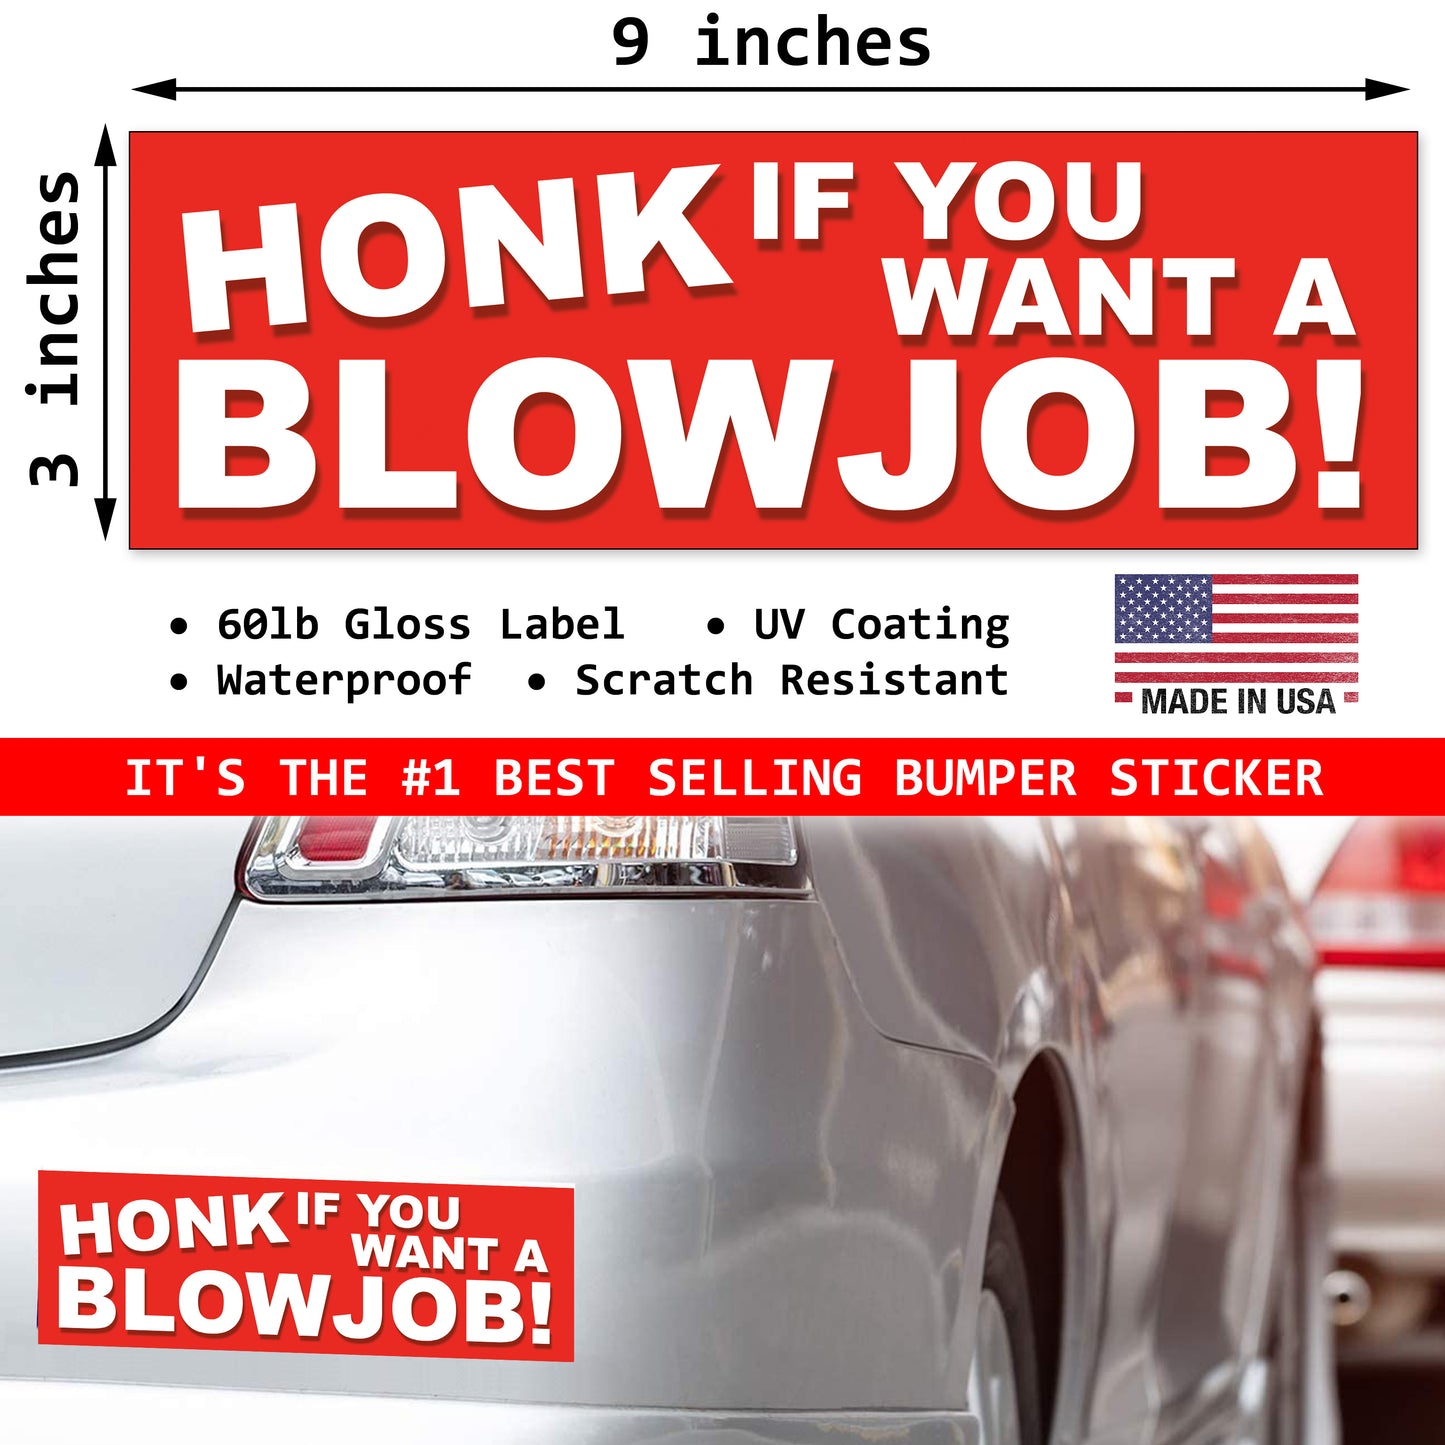 Honk if you want a Blowjob Mail Prank; 4 Pranks in 1